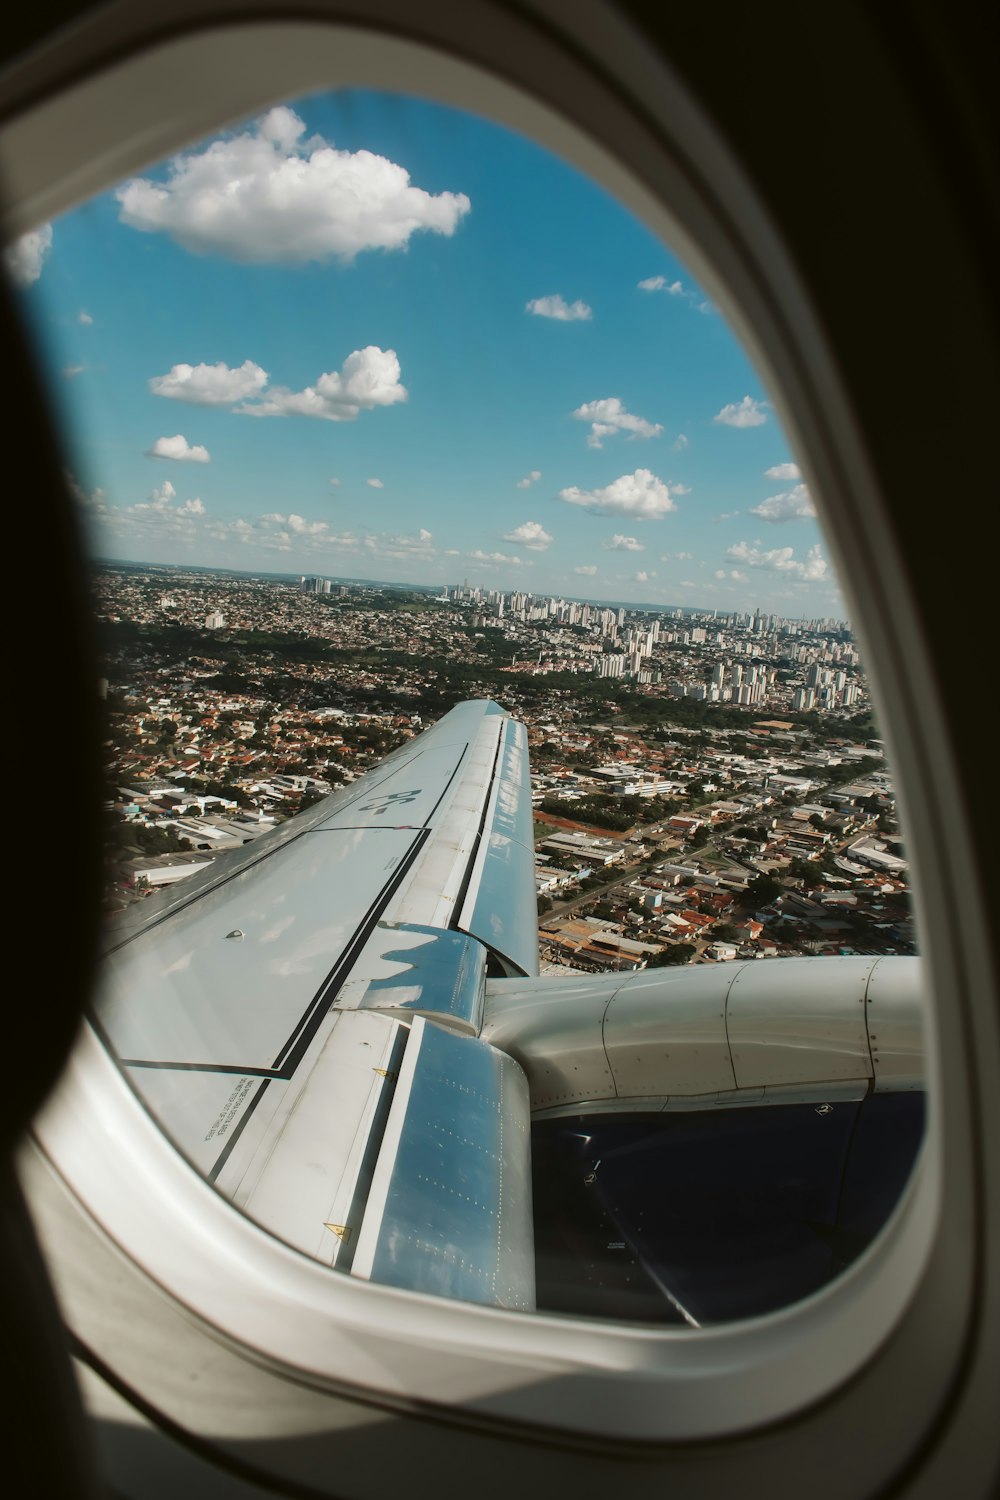 a view of a city from an airplane window